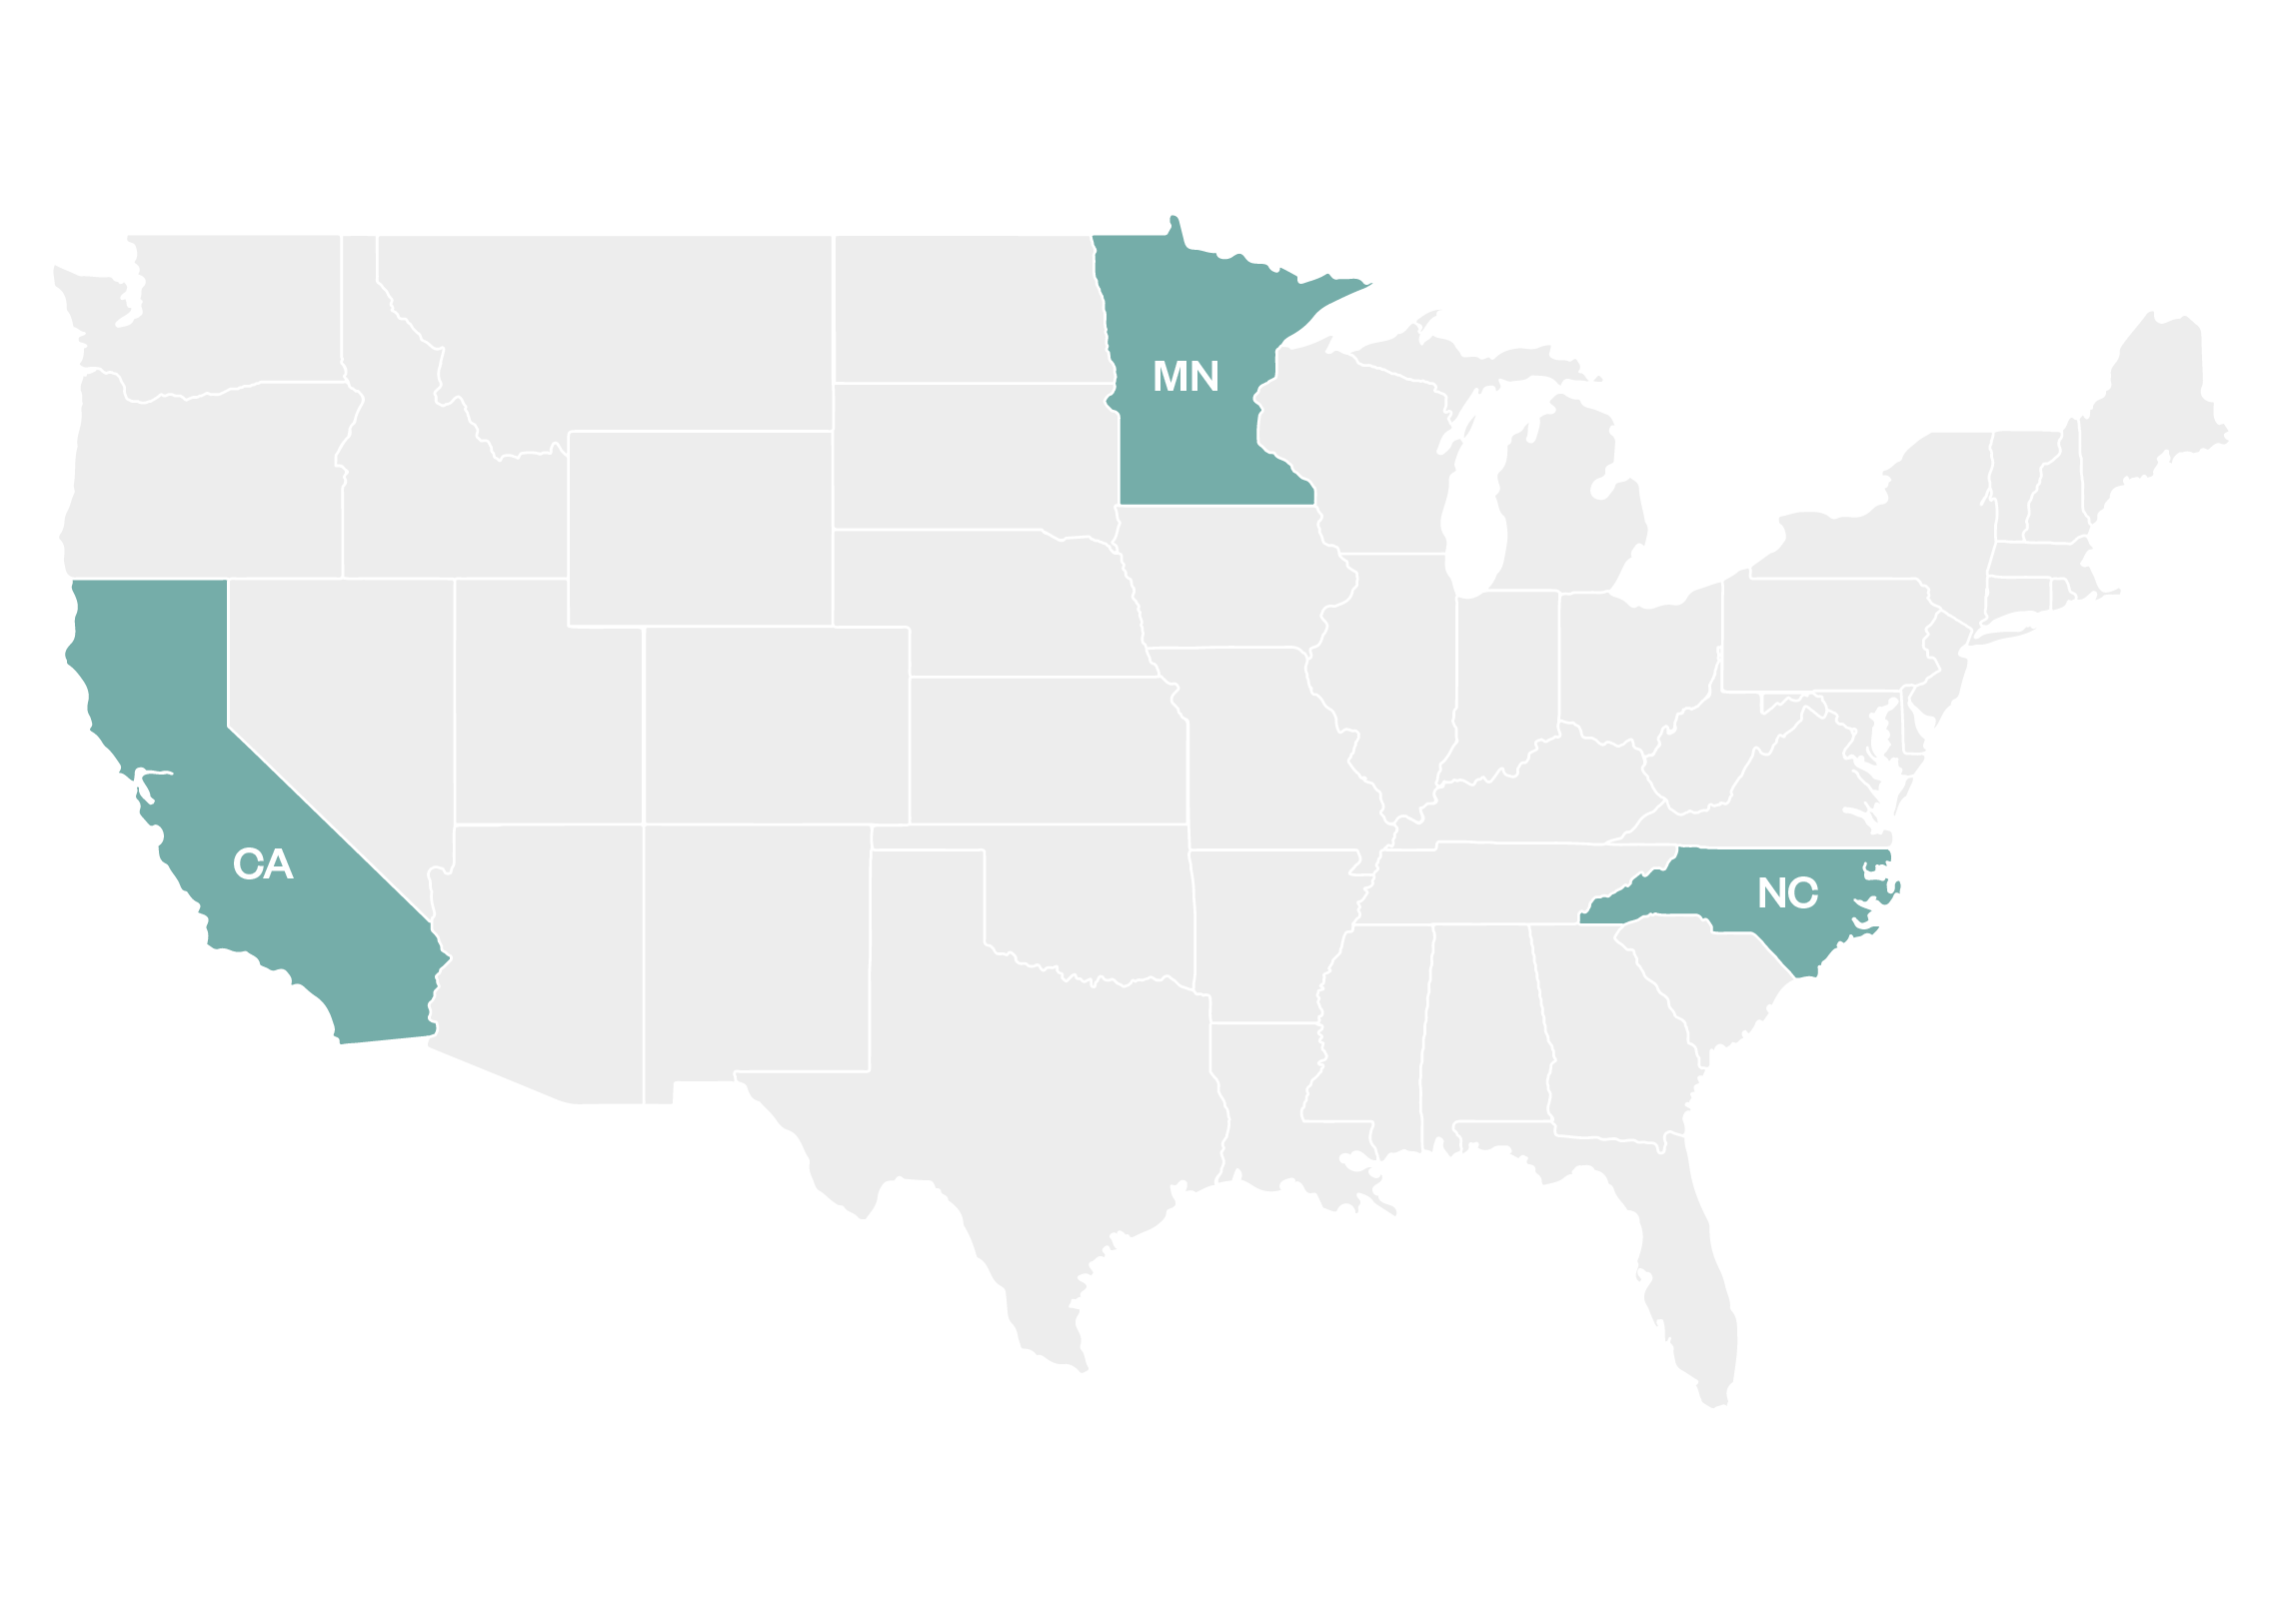 A United States map with California, Minnesota, and North Carolina highlighted